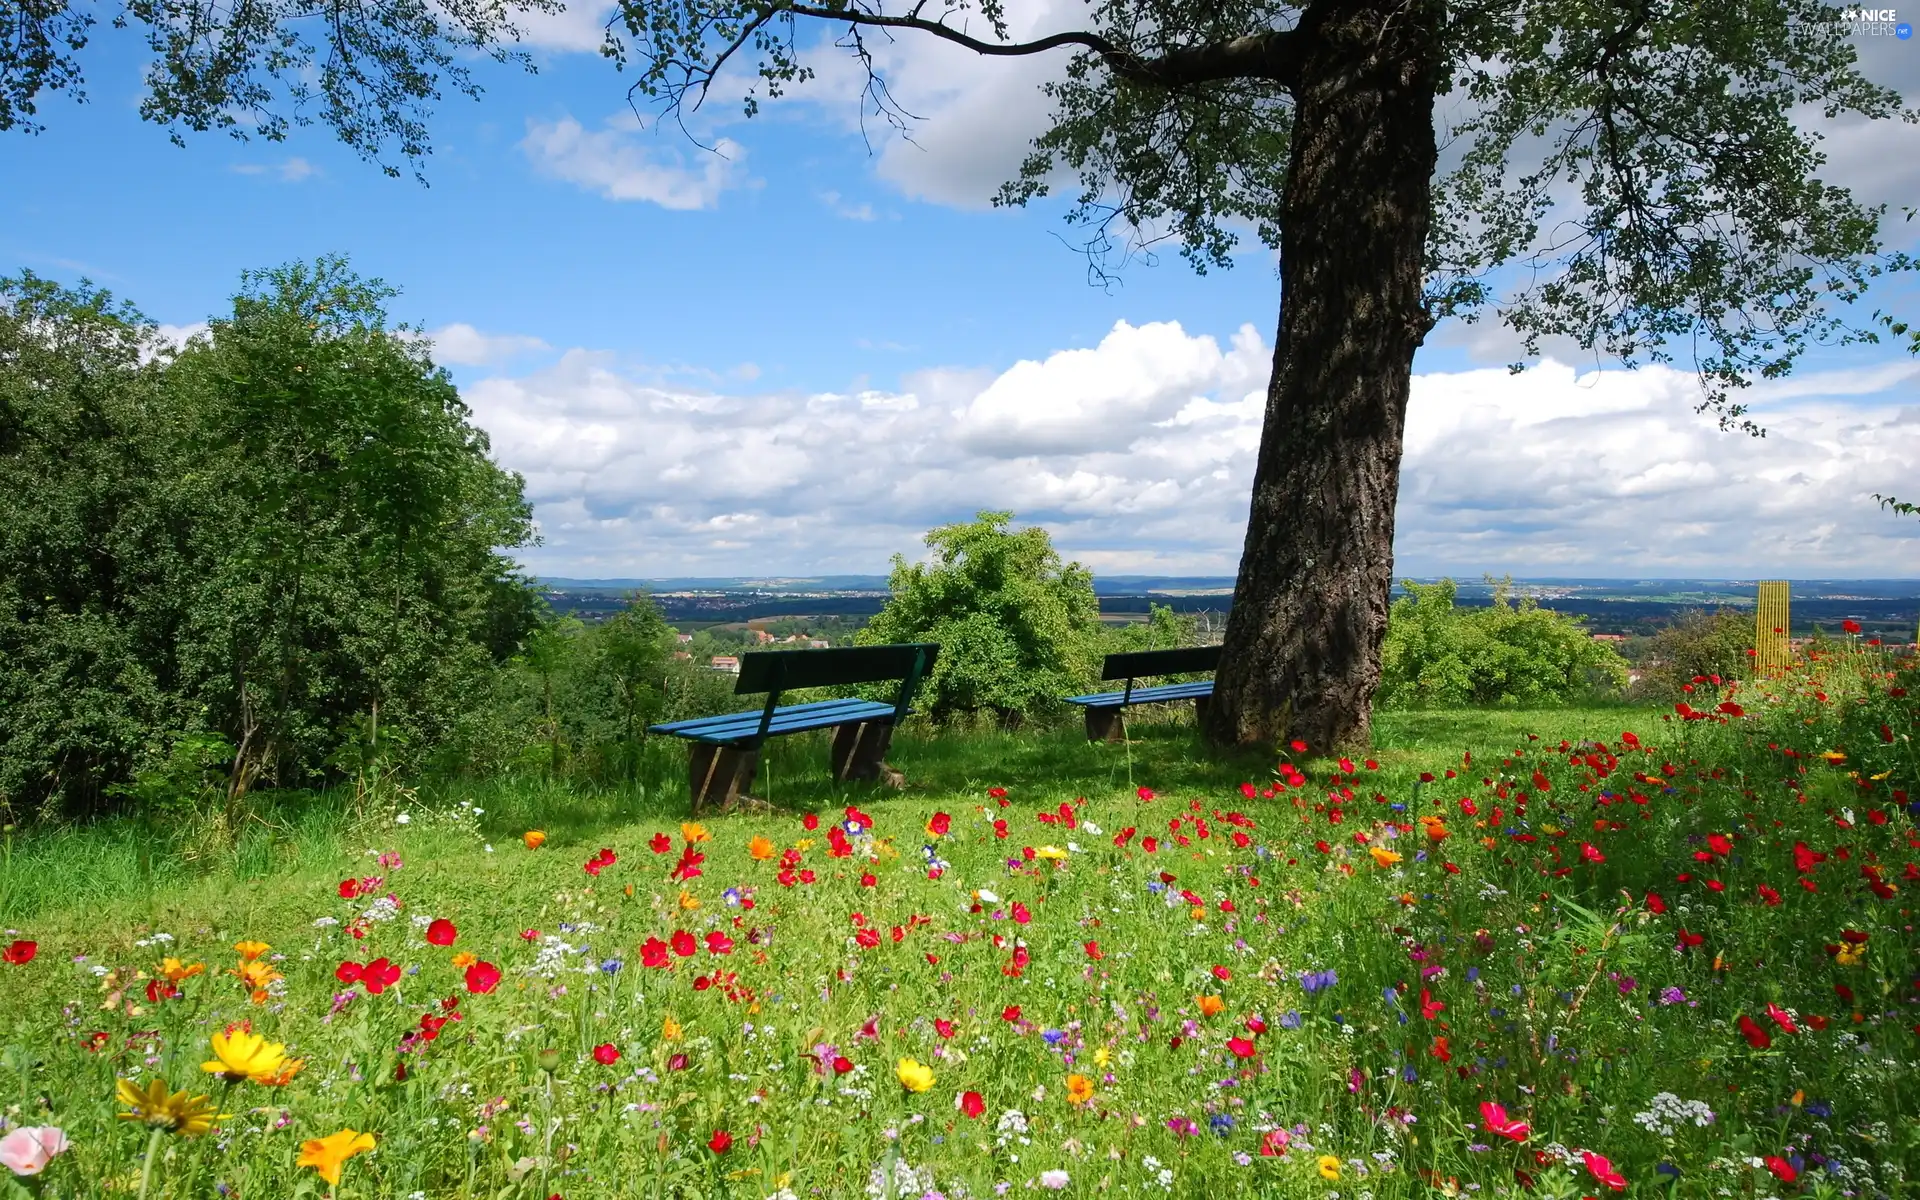 viewes, bench, Flowers, trees, Meadow